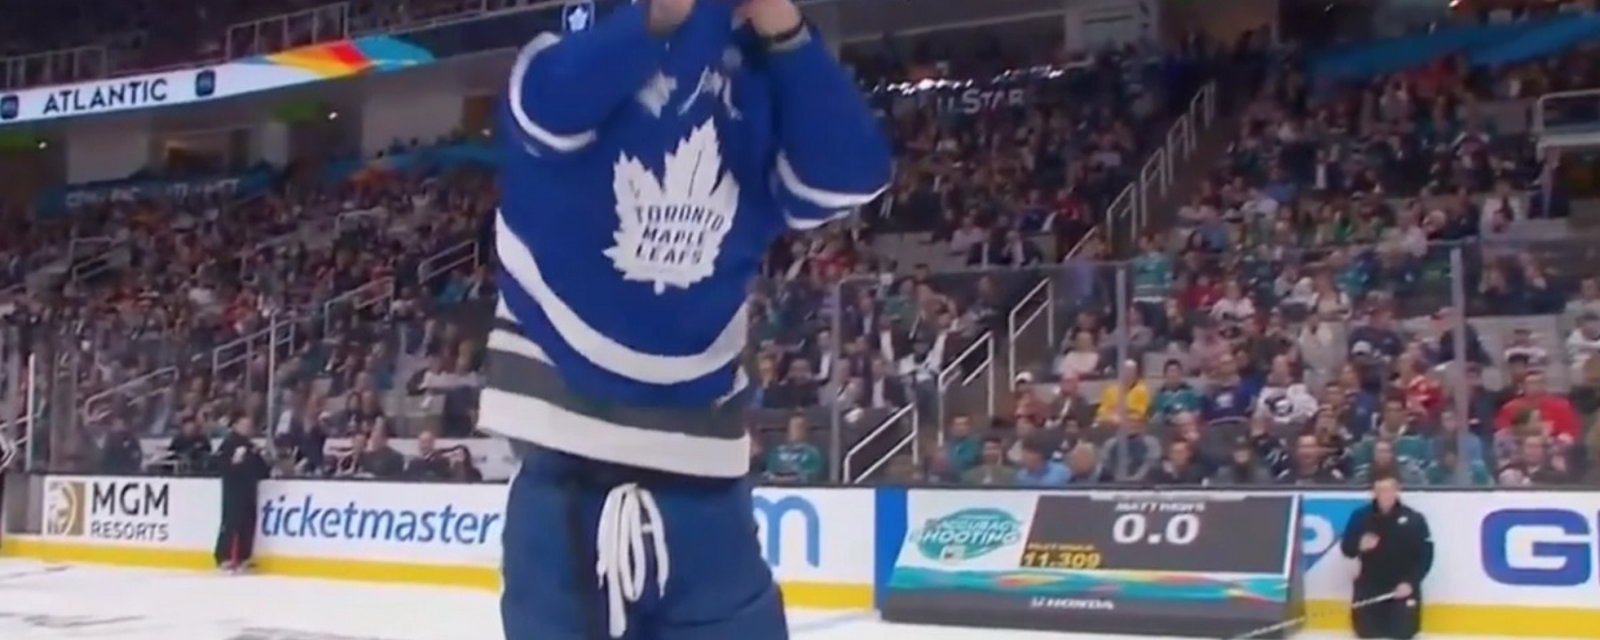 Matthews removes his Leafs jersey and wins over the crowd in San Jose!